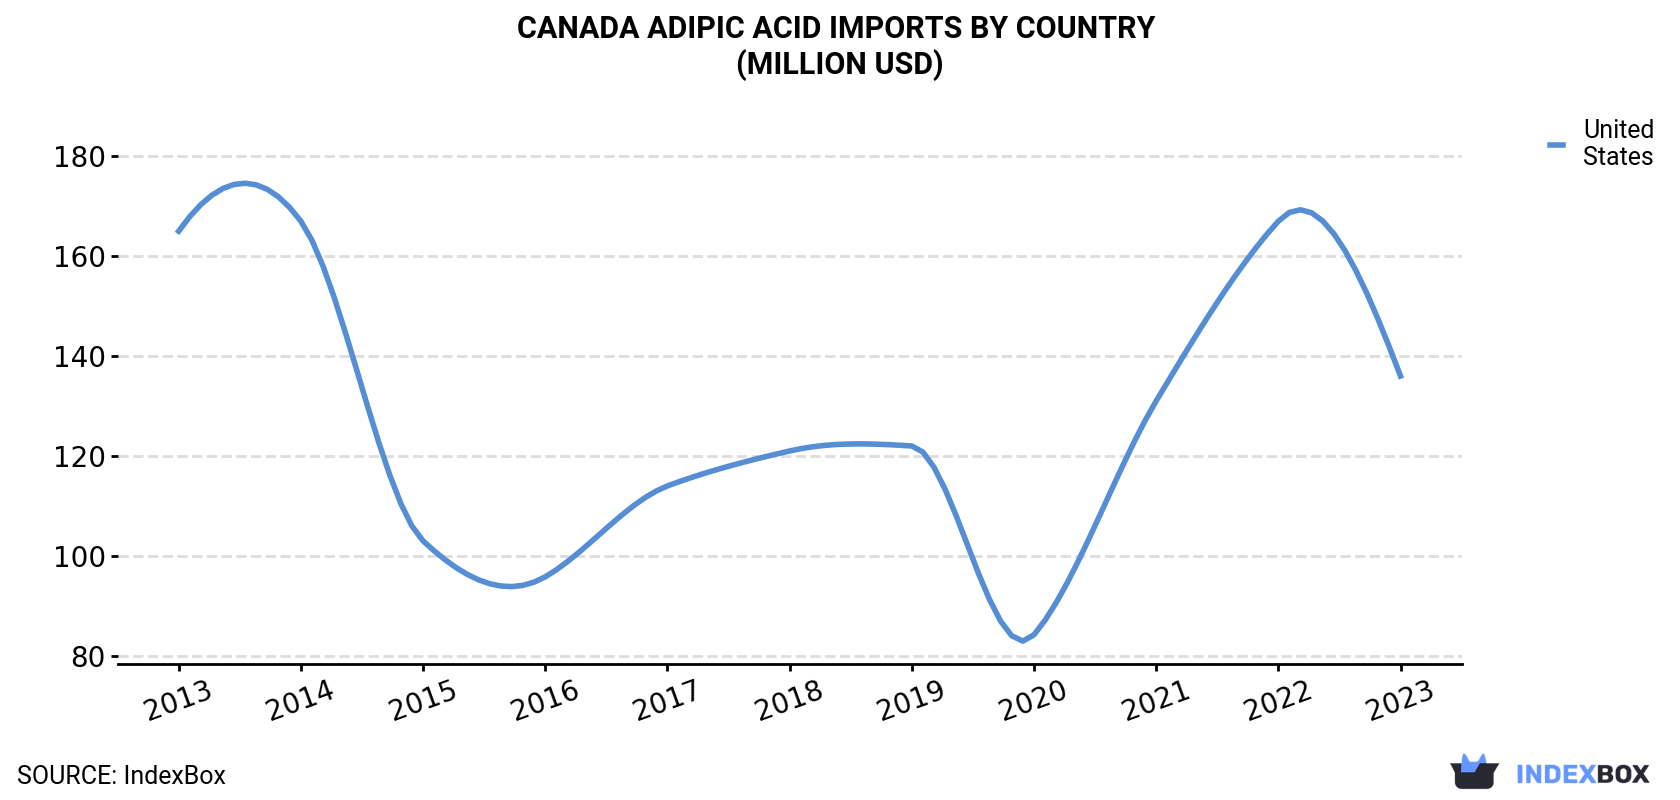 Canada Adipic Acid Imports By Country (Million USD)